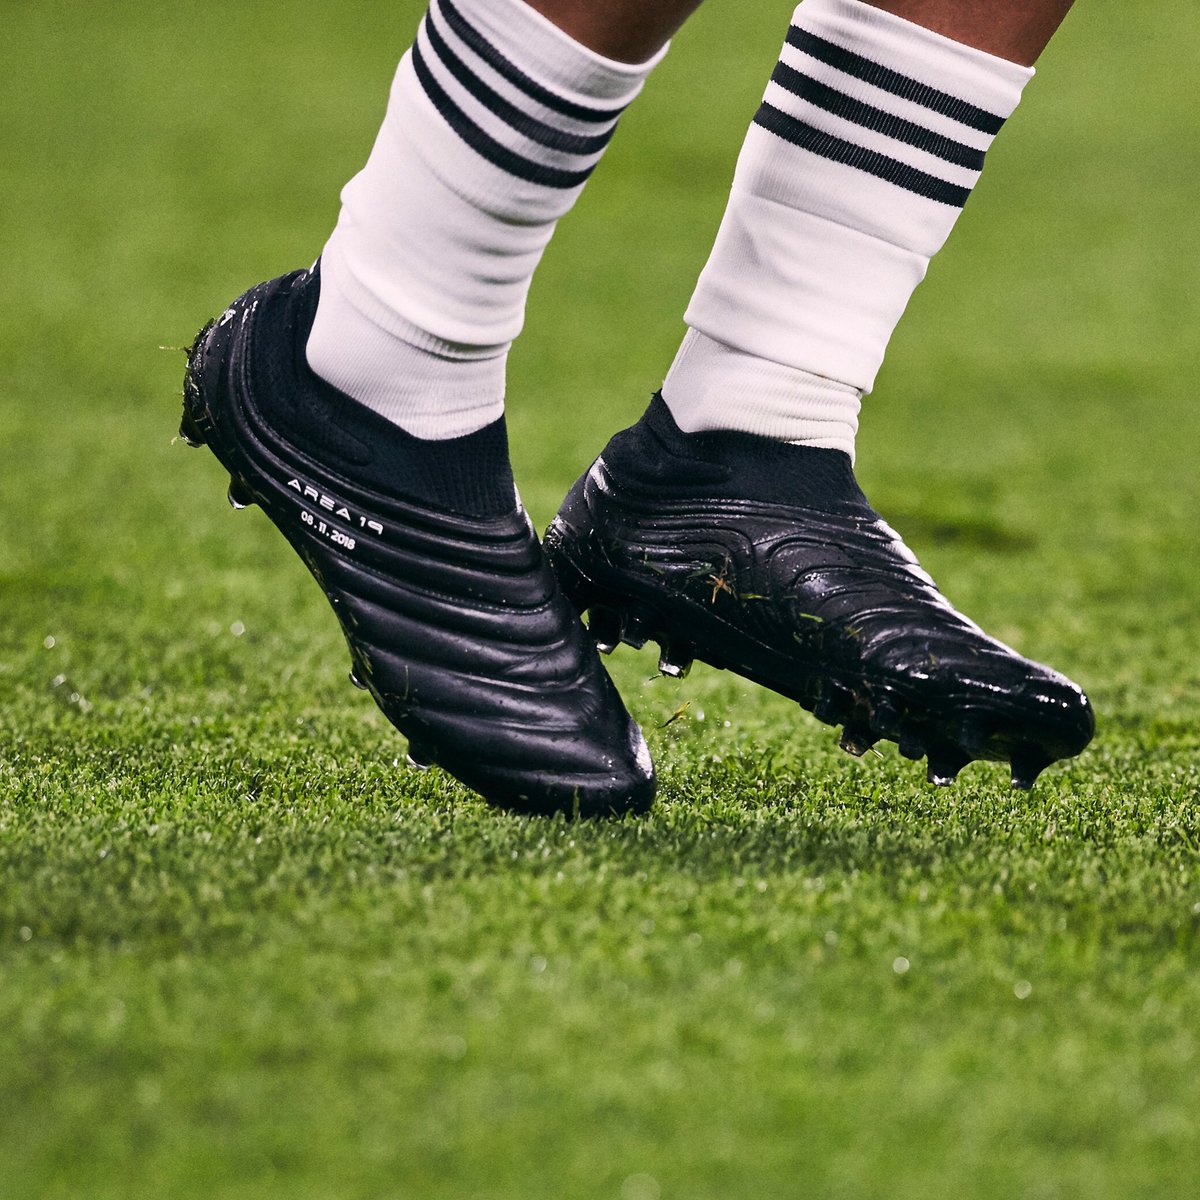 Paulo Dybala Wears Blackout Adidas Copa 19+ Boots vs Manchester United ...